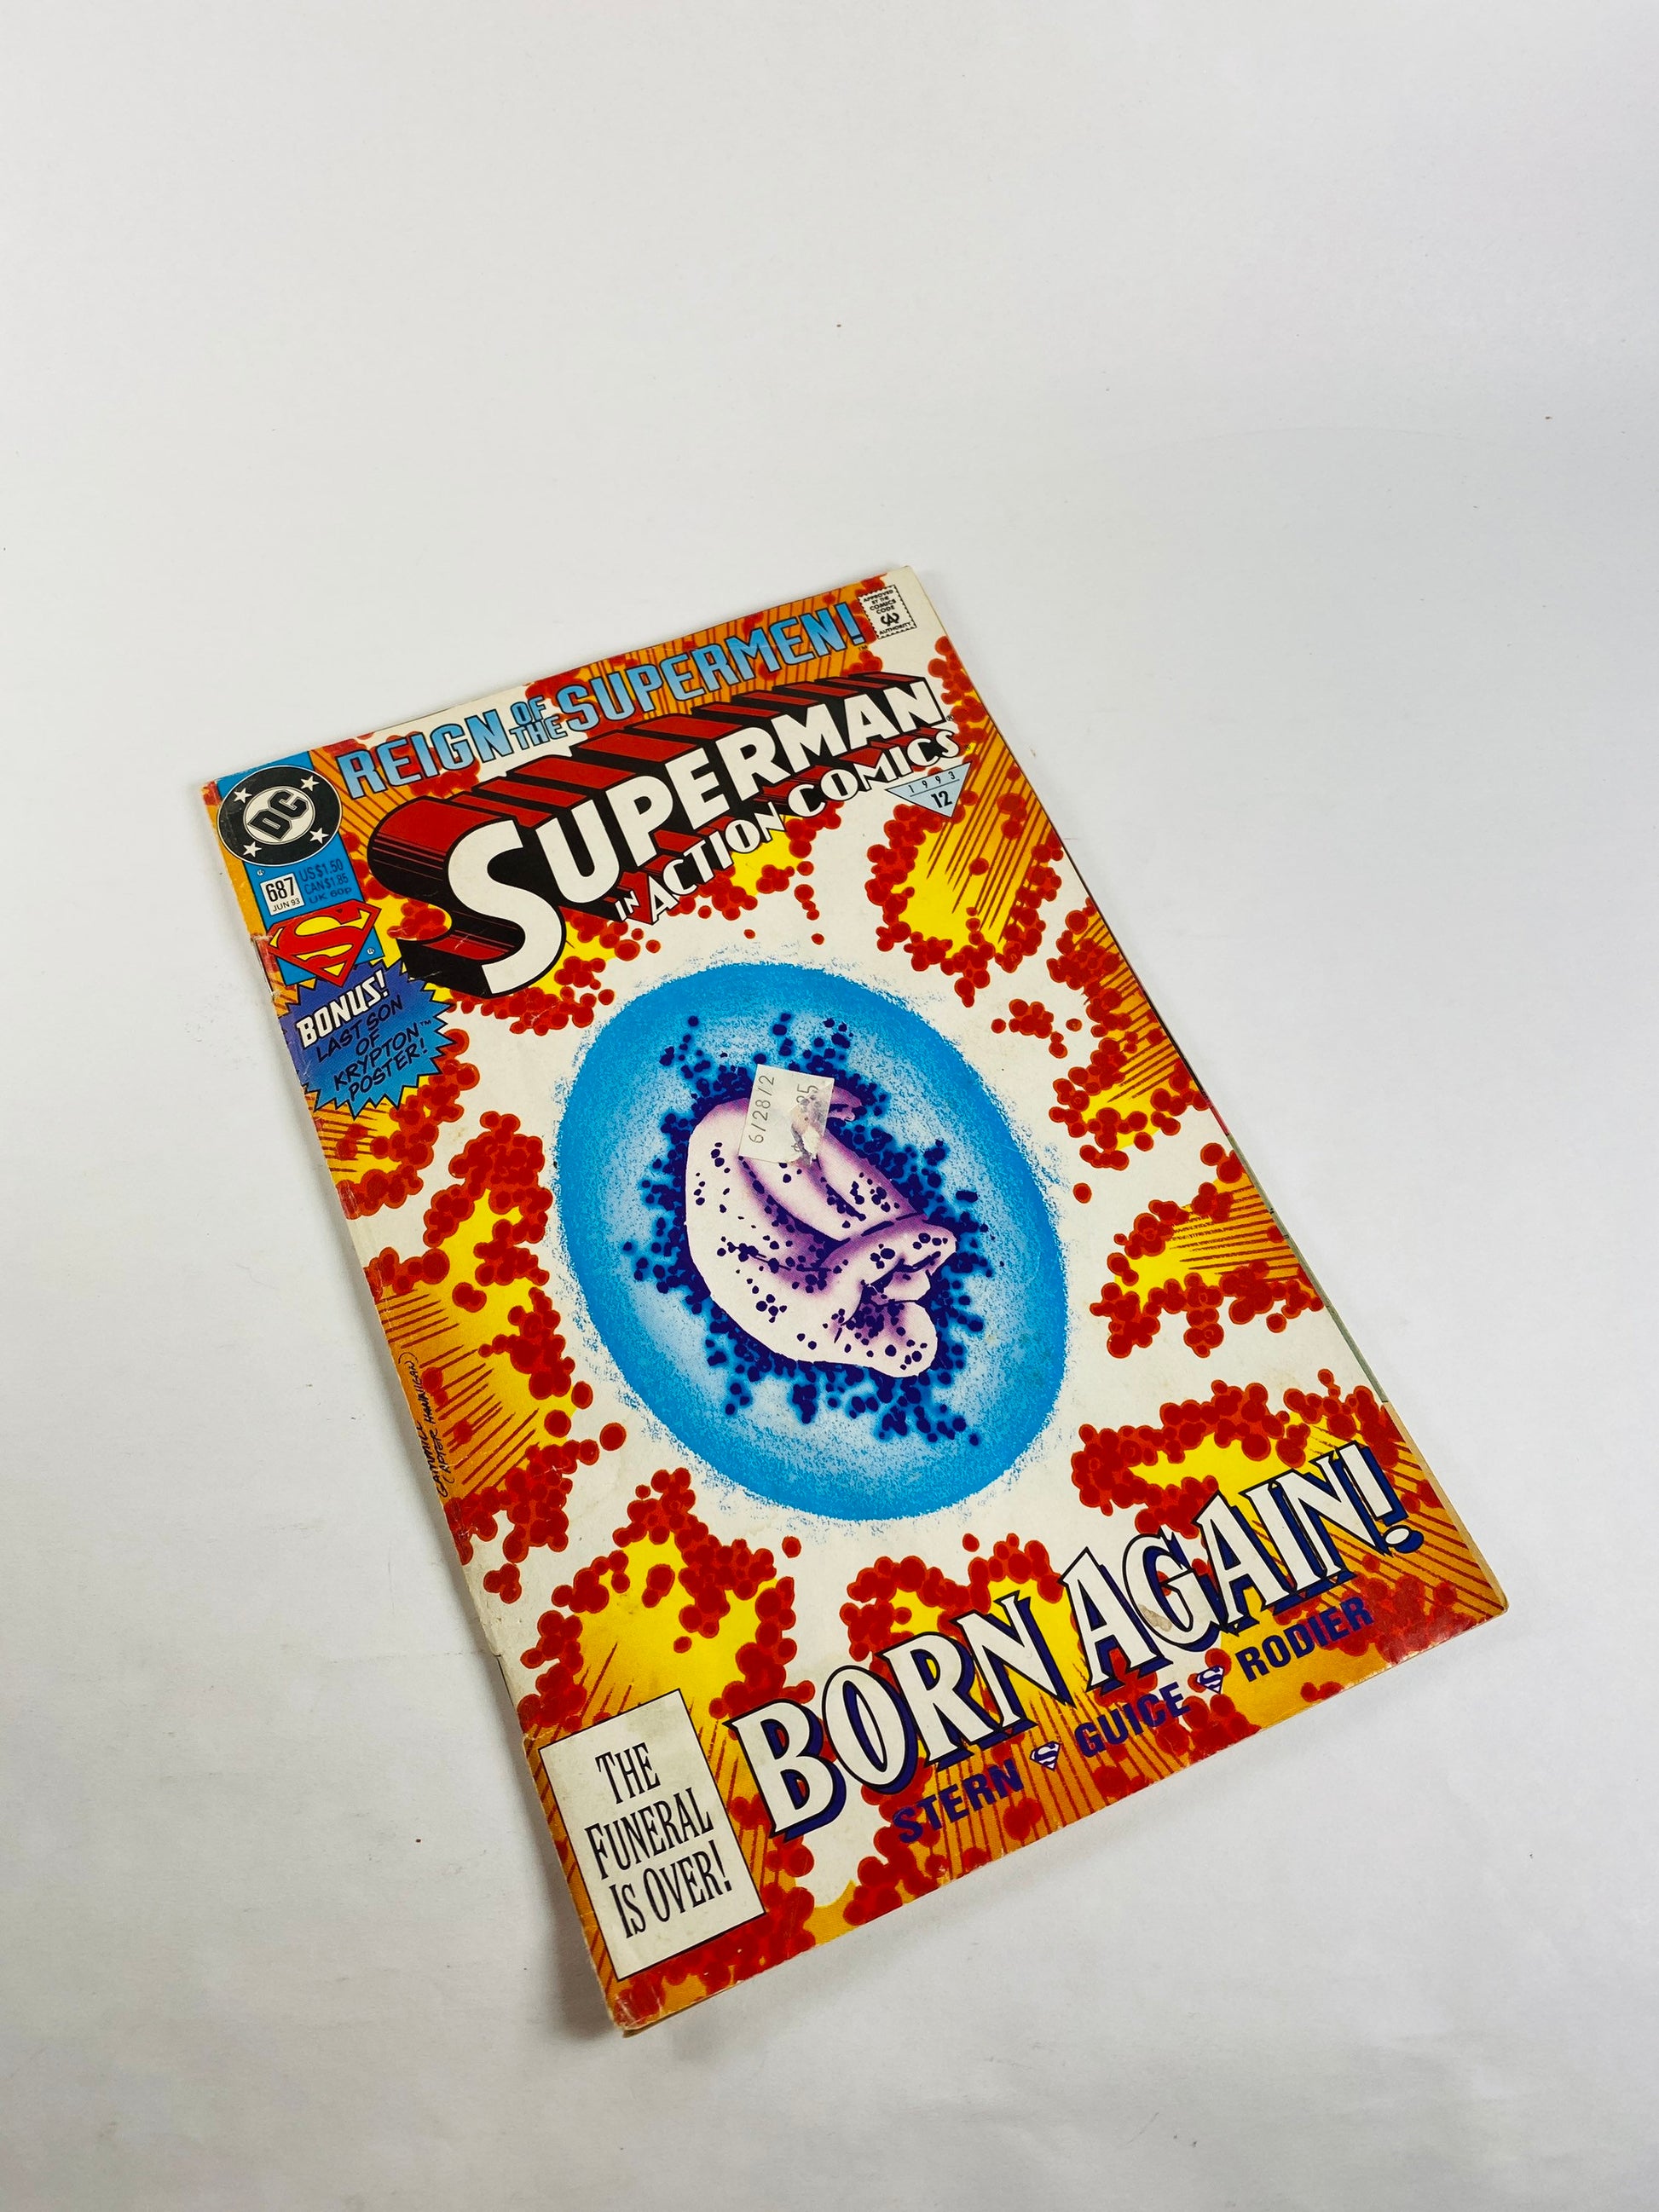 Death of Superman Reign of the Supermen Vintage DC Comic Book 687 22 501 78 Doomsday Truth & Justice Busting Out Born again